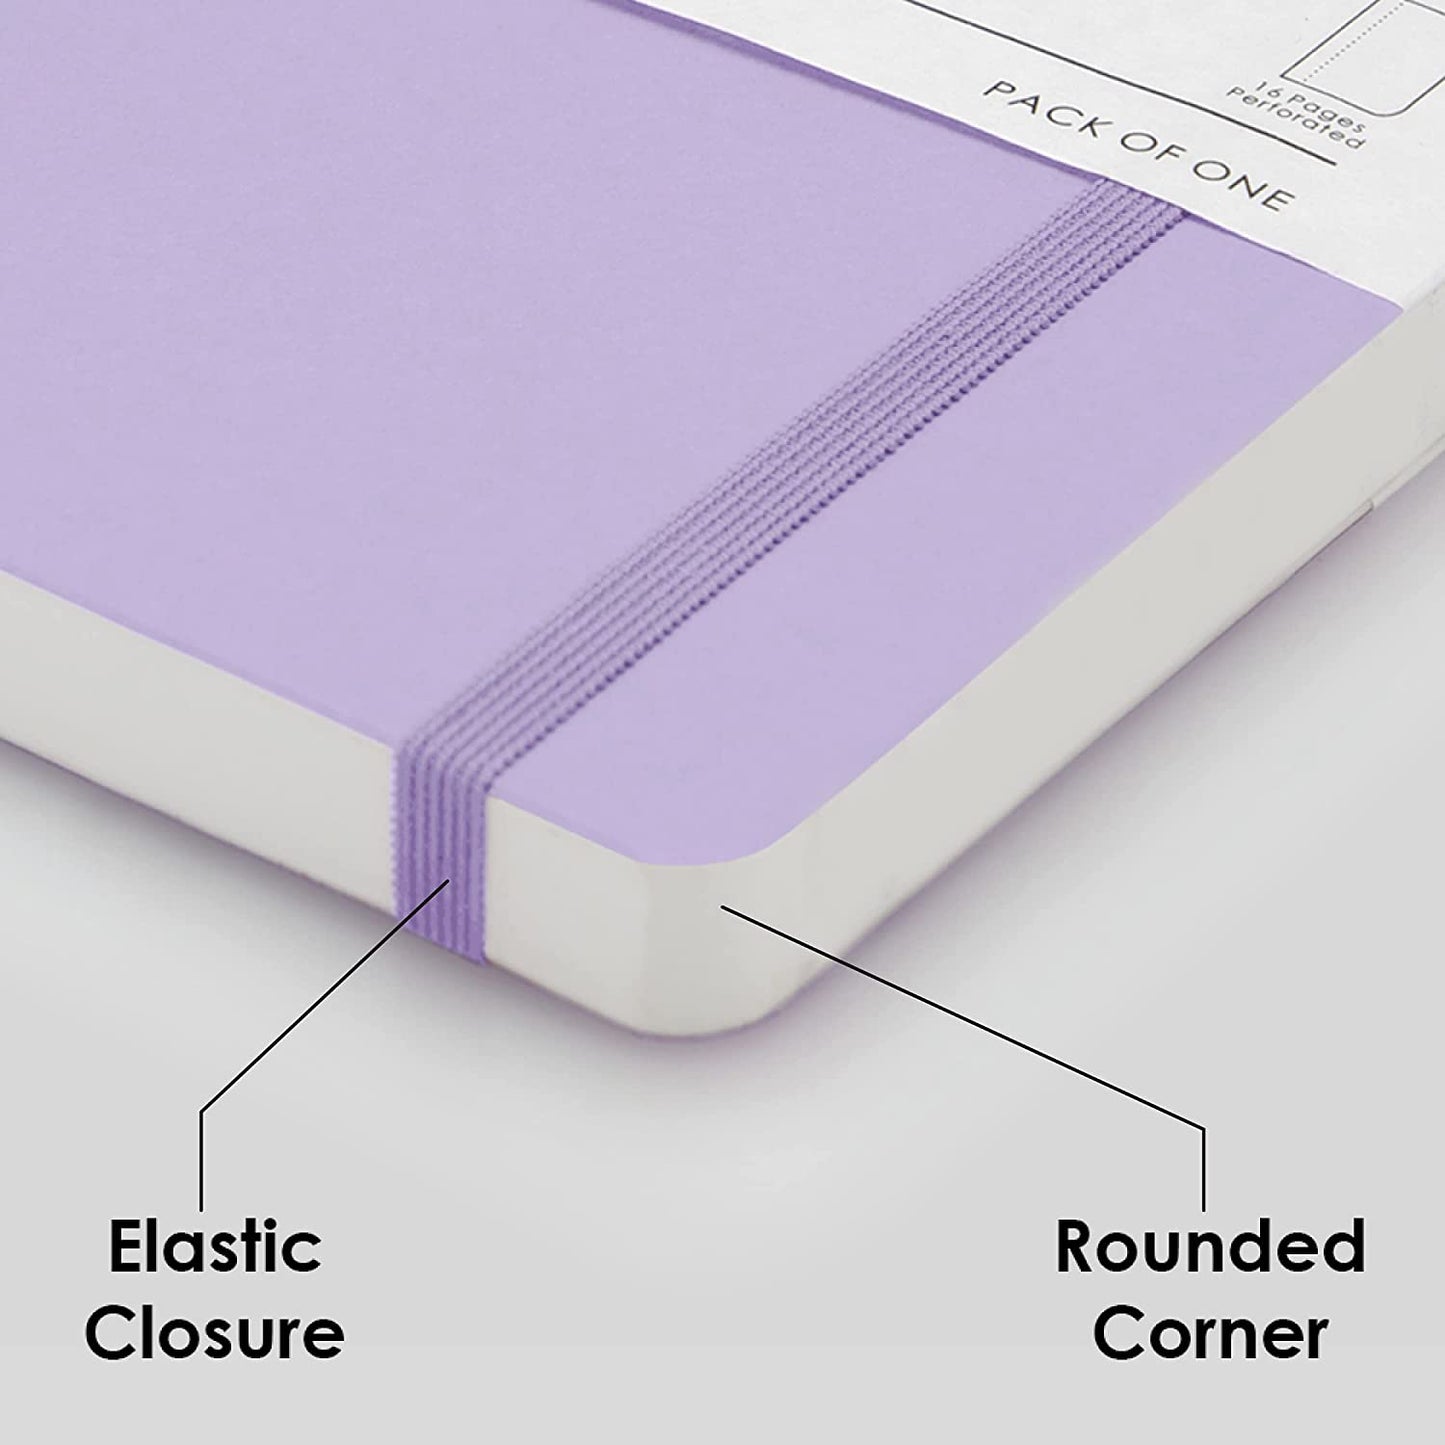 Mypaperclip Limited Edition Notebook, A5 (148 X 210 Mm, 5 .83 X 8.27 In.) Plain Lep192A5-P - Lilac